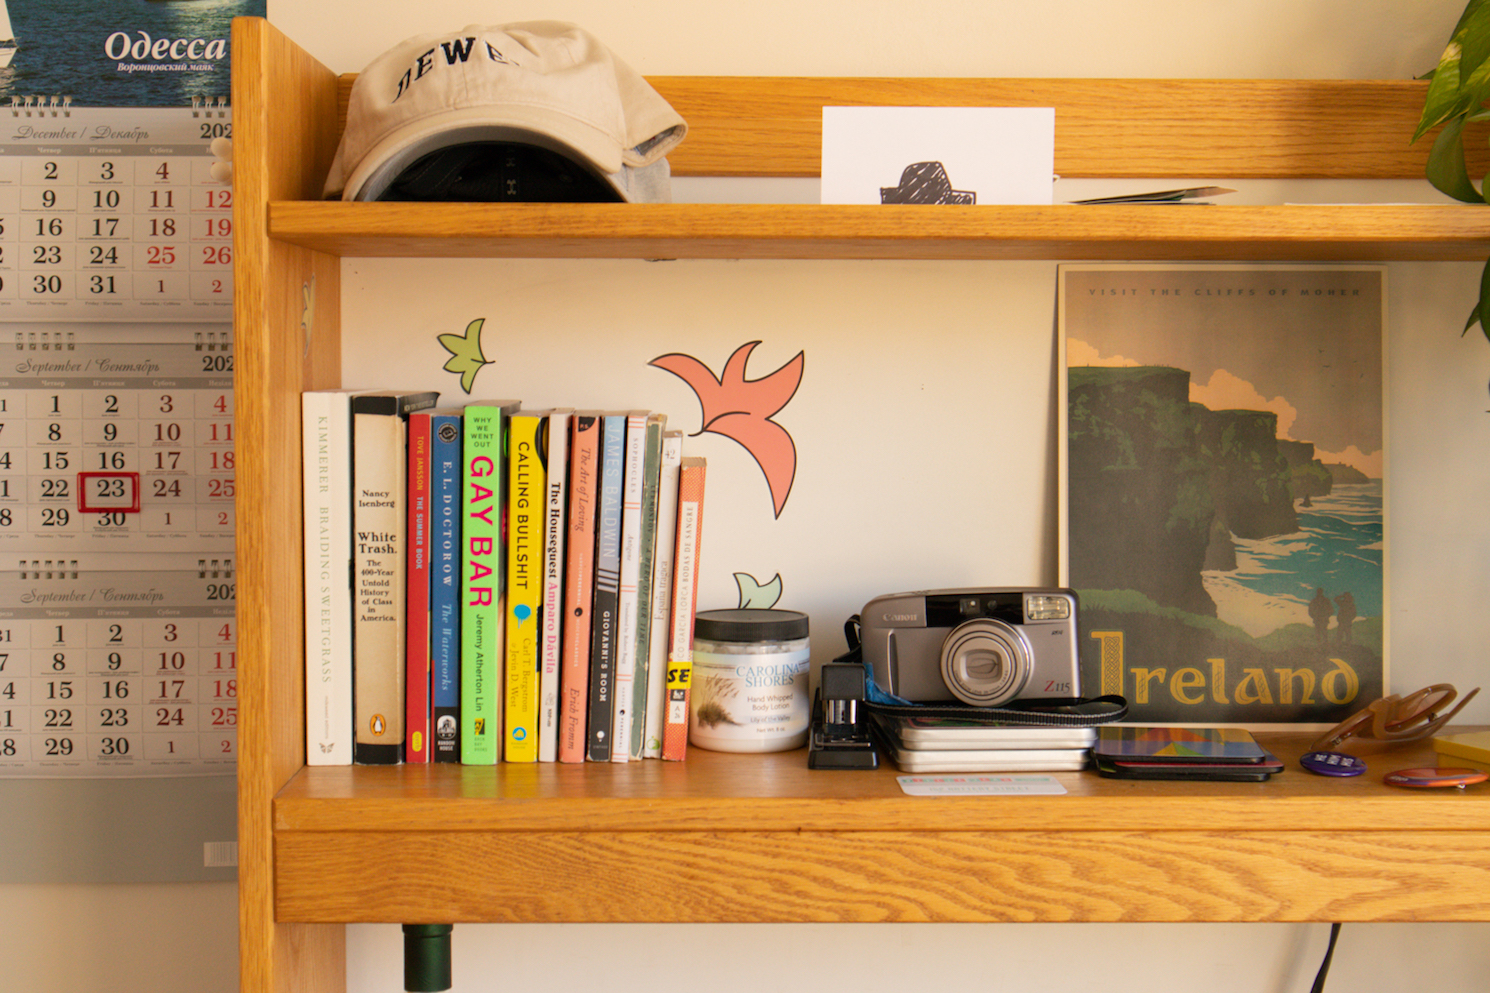 A shelf on a wooden desk with books, a stapler, a camera, and a poster on it.